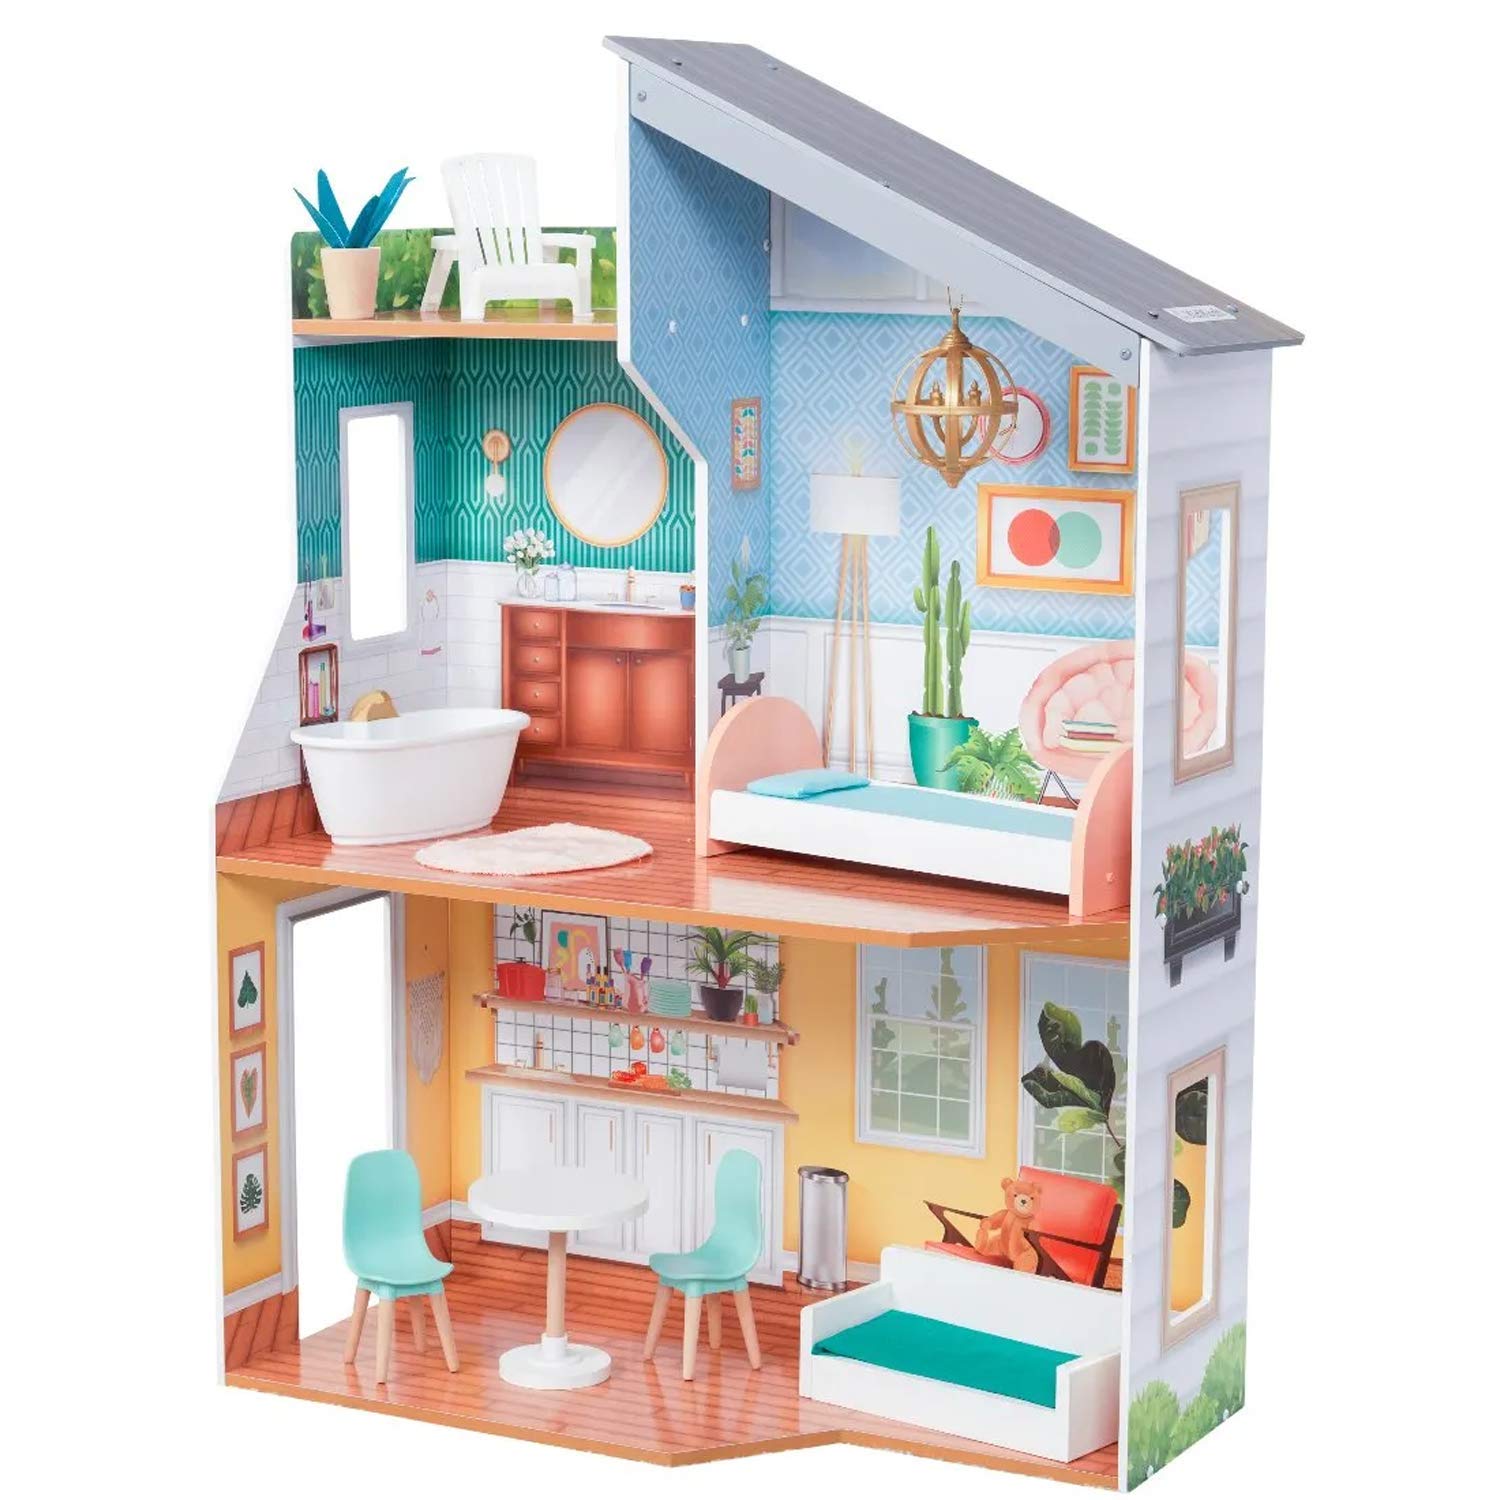 KidKraft Emily Wooden Dollhouse with 10 Accessories Included, for 12